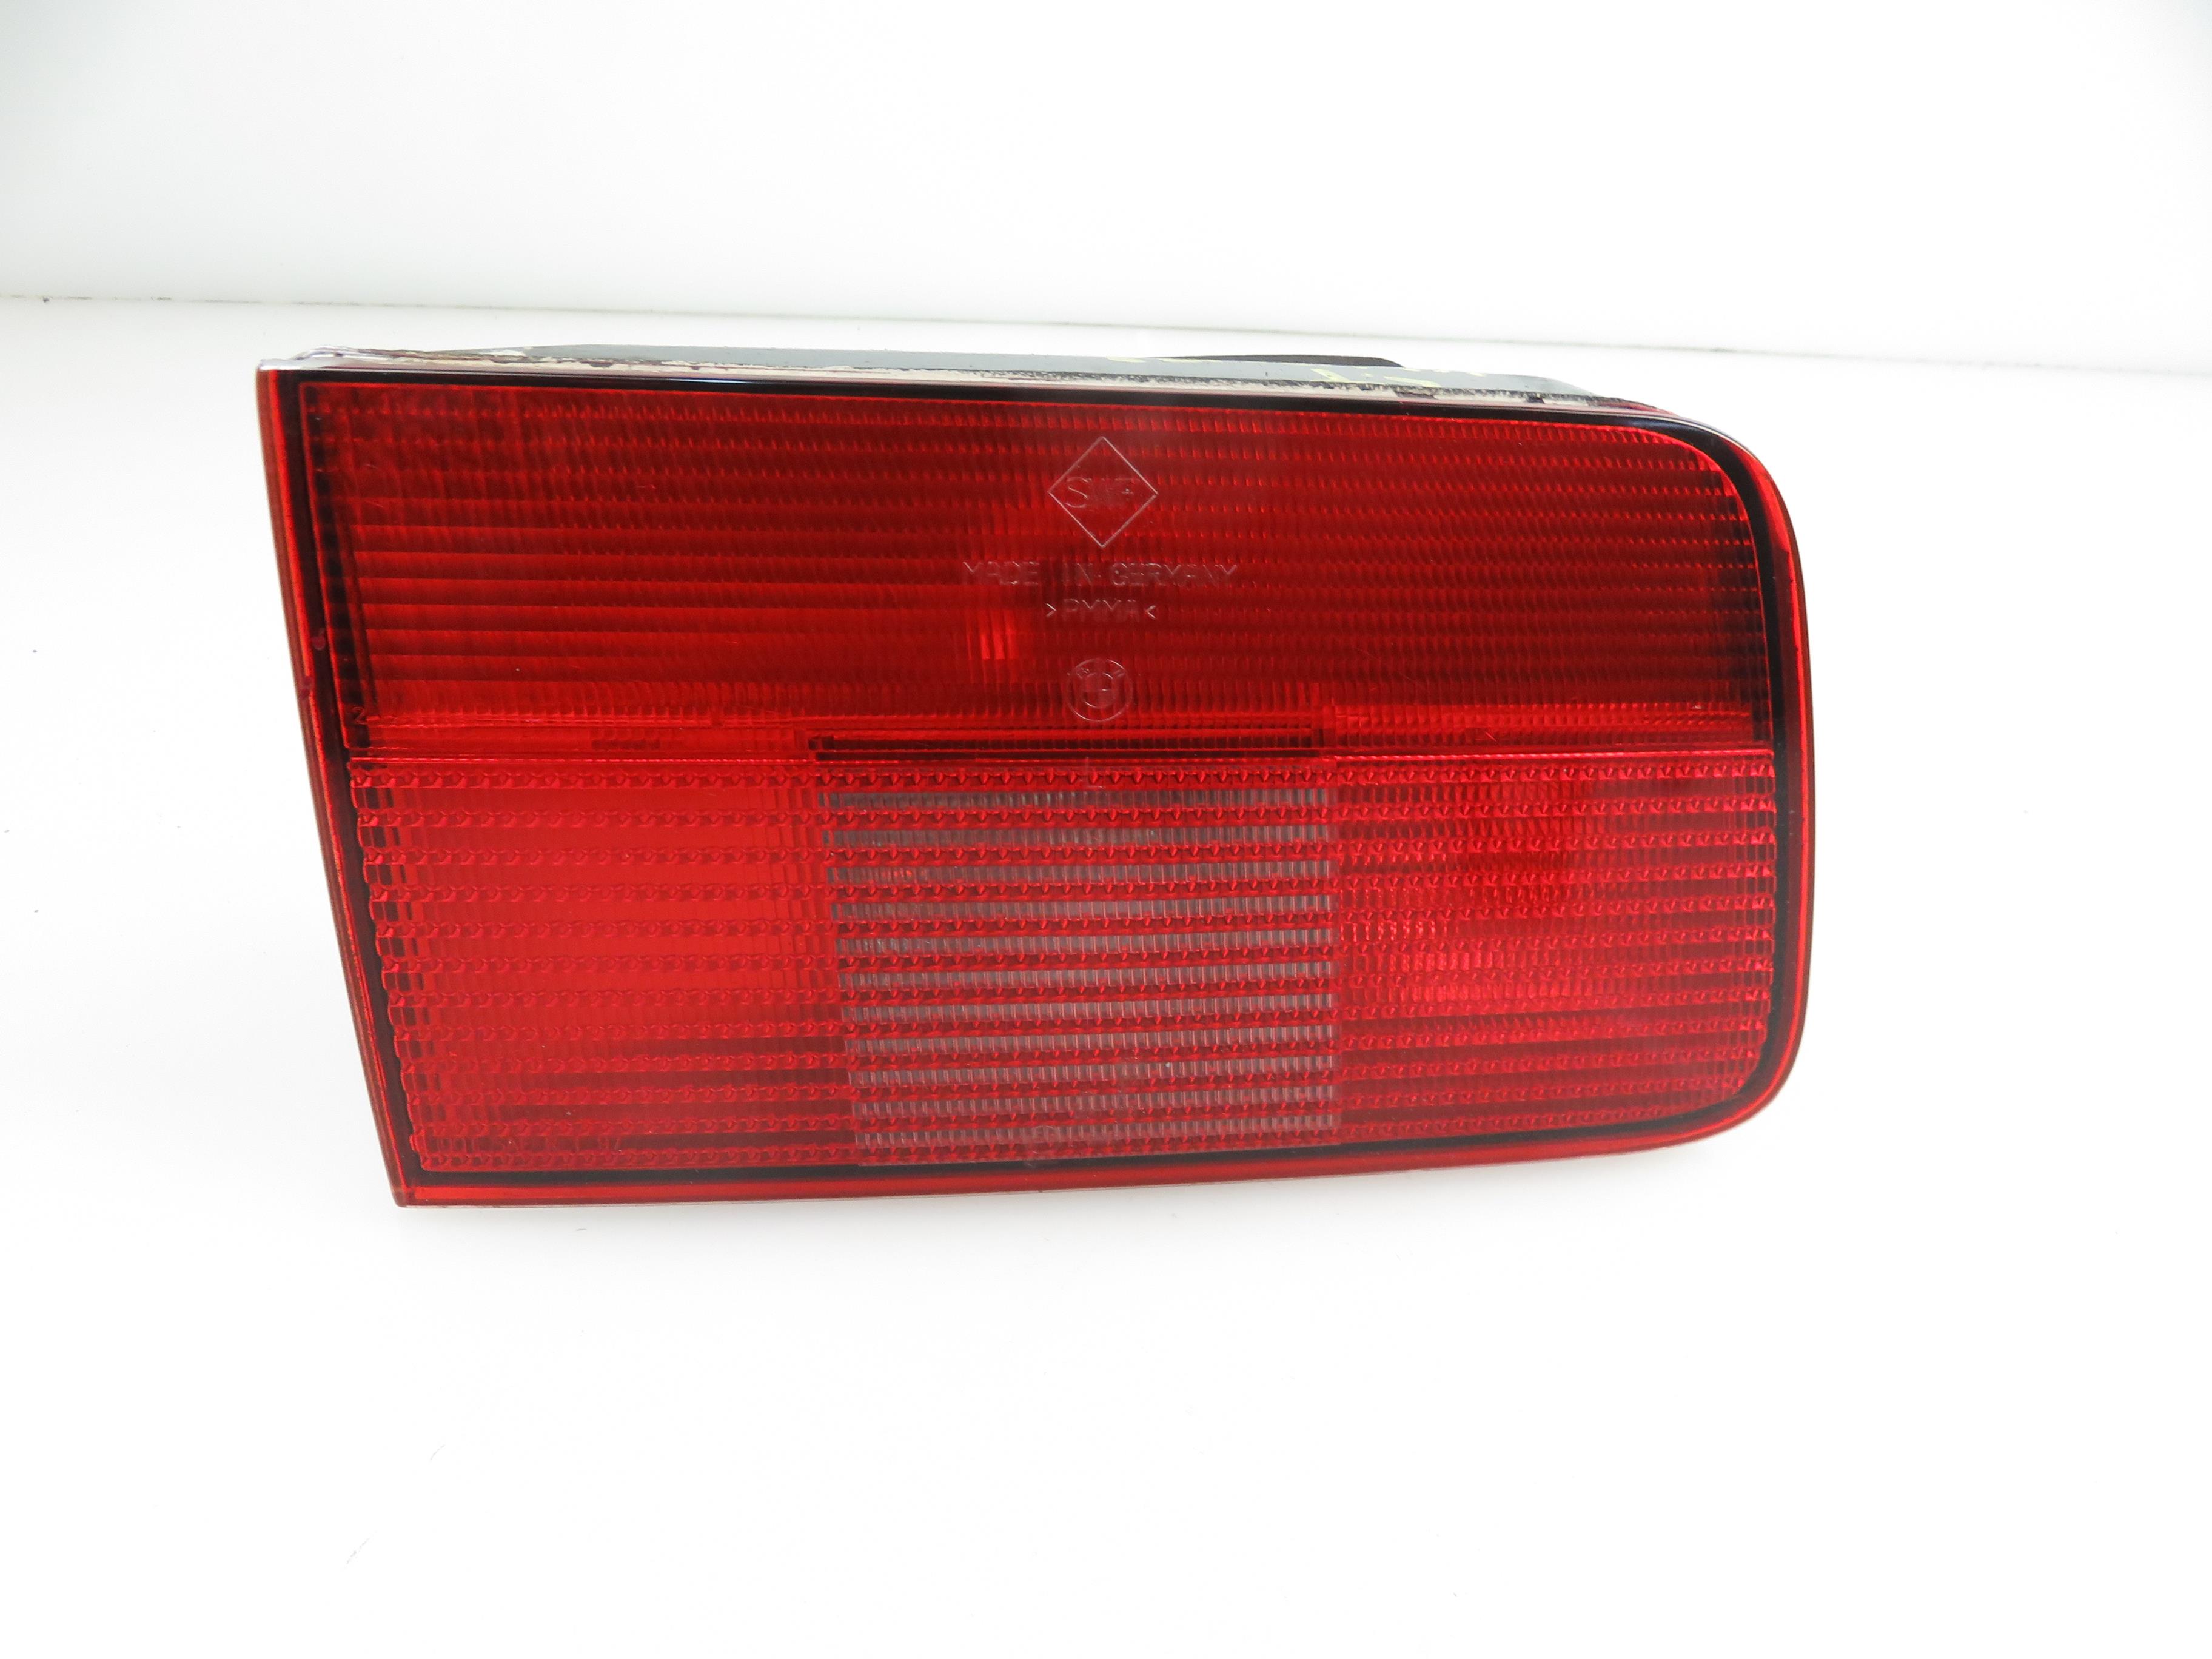 BMW 5 Series E39 (1995-2004) Rear Left Taillight 8361673 21857908